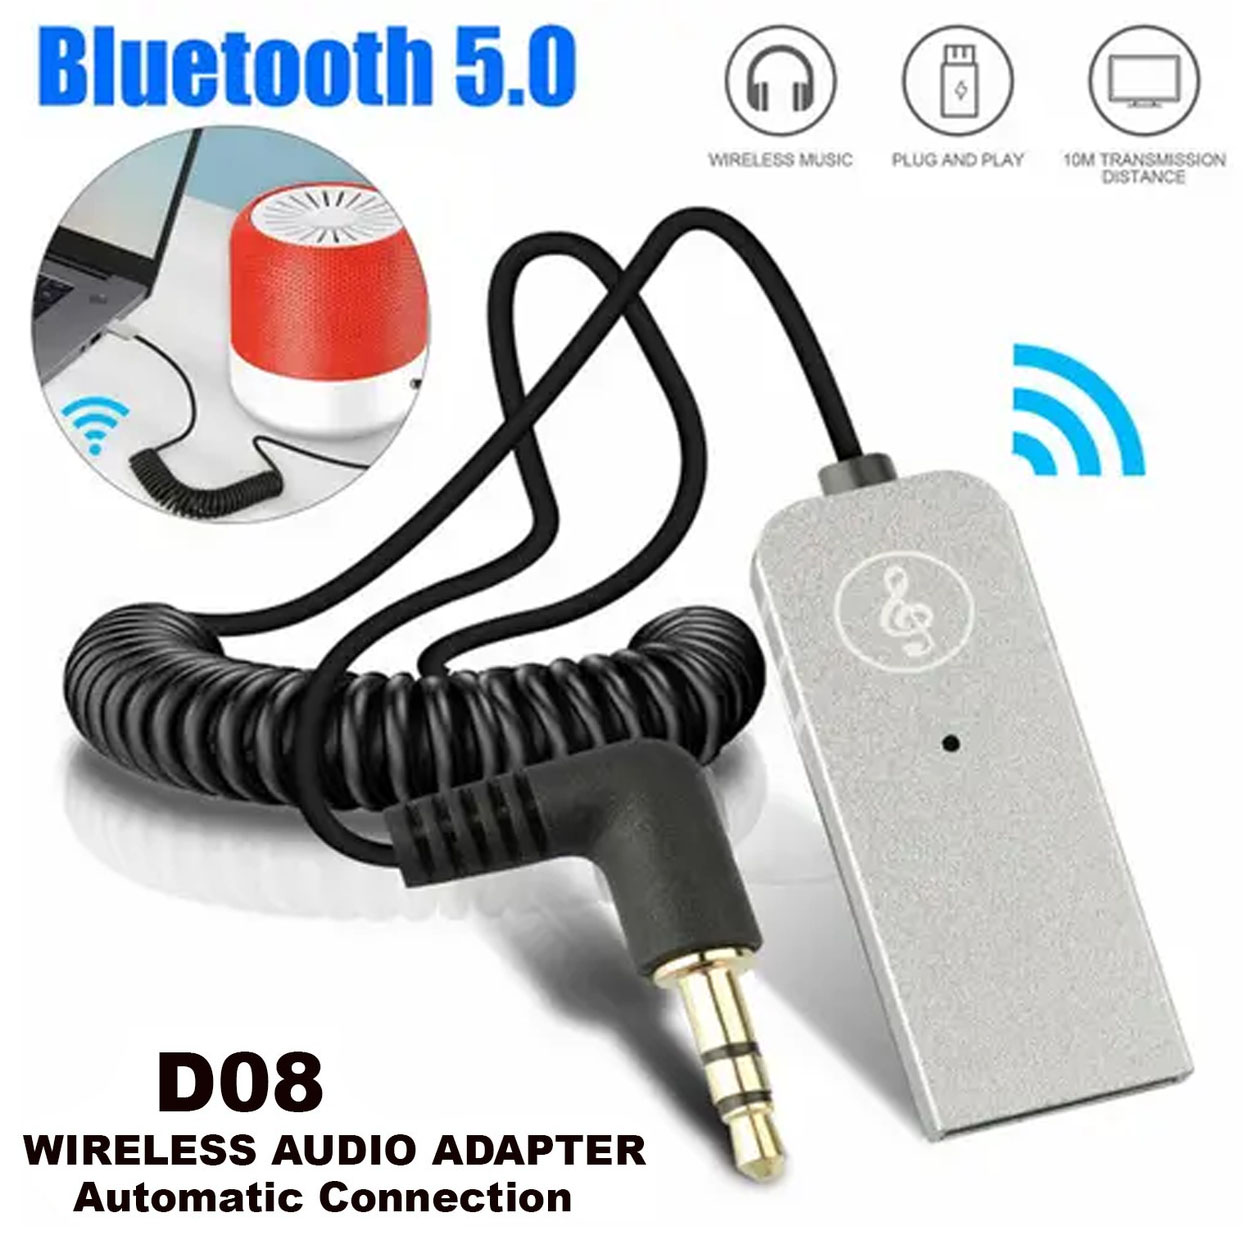 Bluetooth Receiver 5.0 Car Wireless USB Bluetooth Adapter 3.5mm 3.5 Jack Aux Audio Wireless Adapter for Car Stereo PC Headphones Mic 3.5 Home Handsfree Smart phone call Bluetooth 5.0 Receptor Music